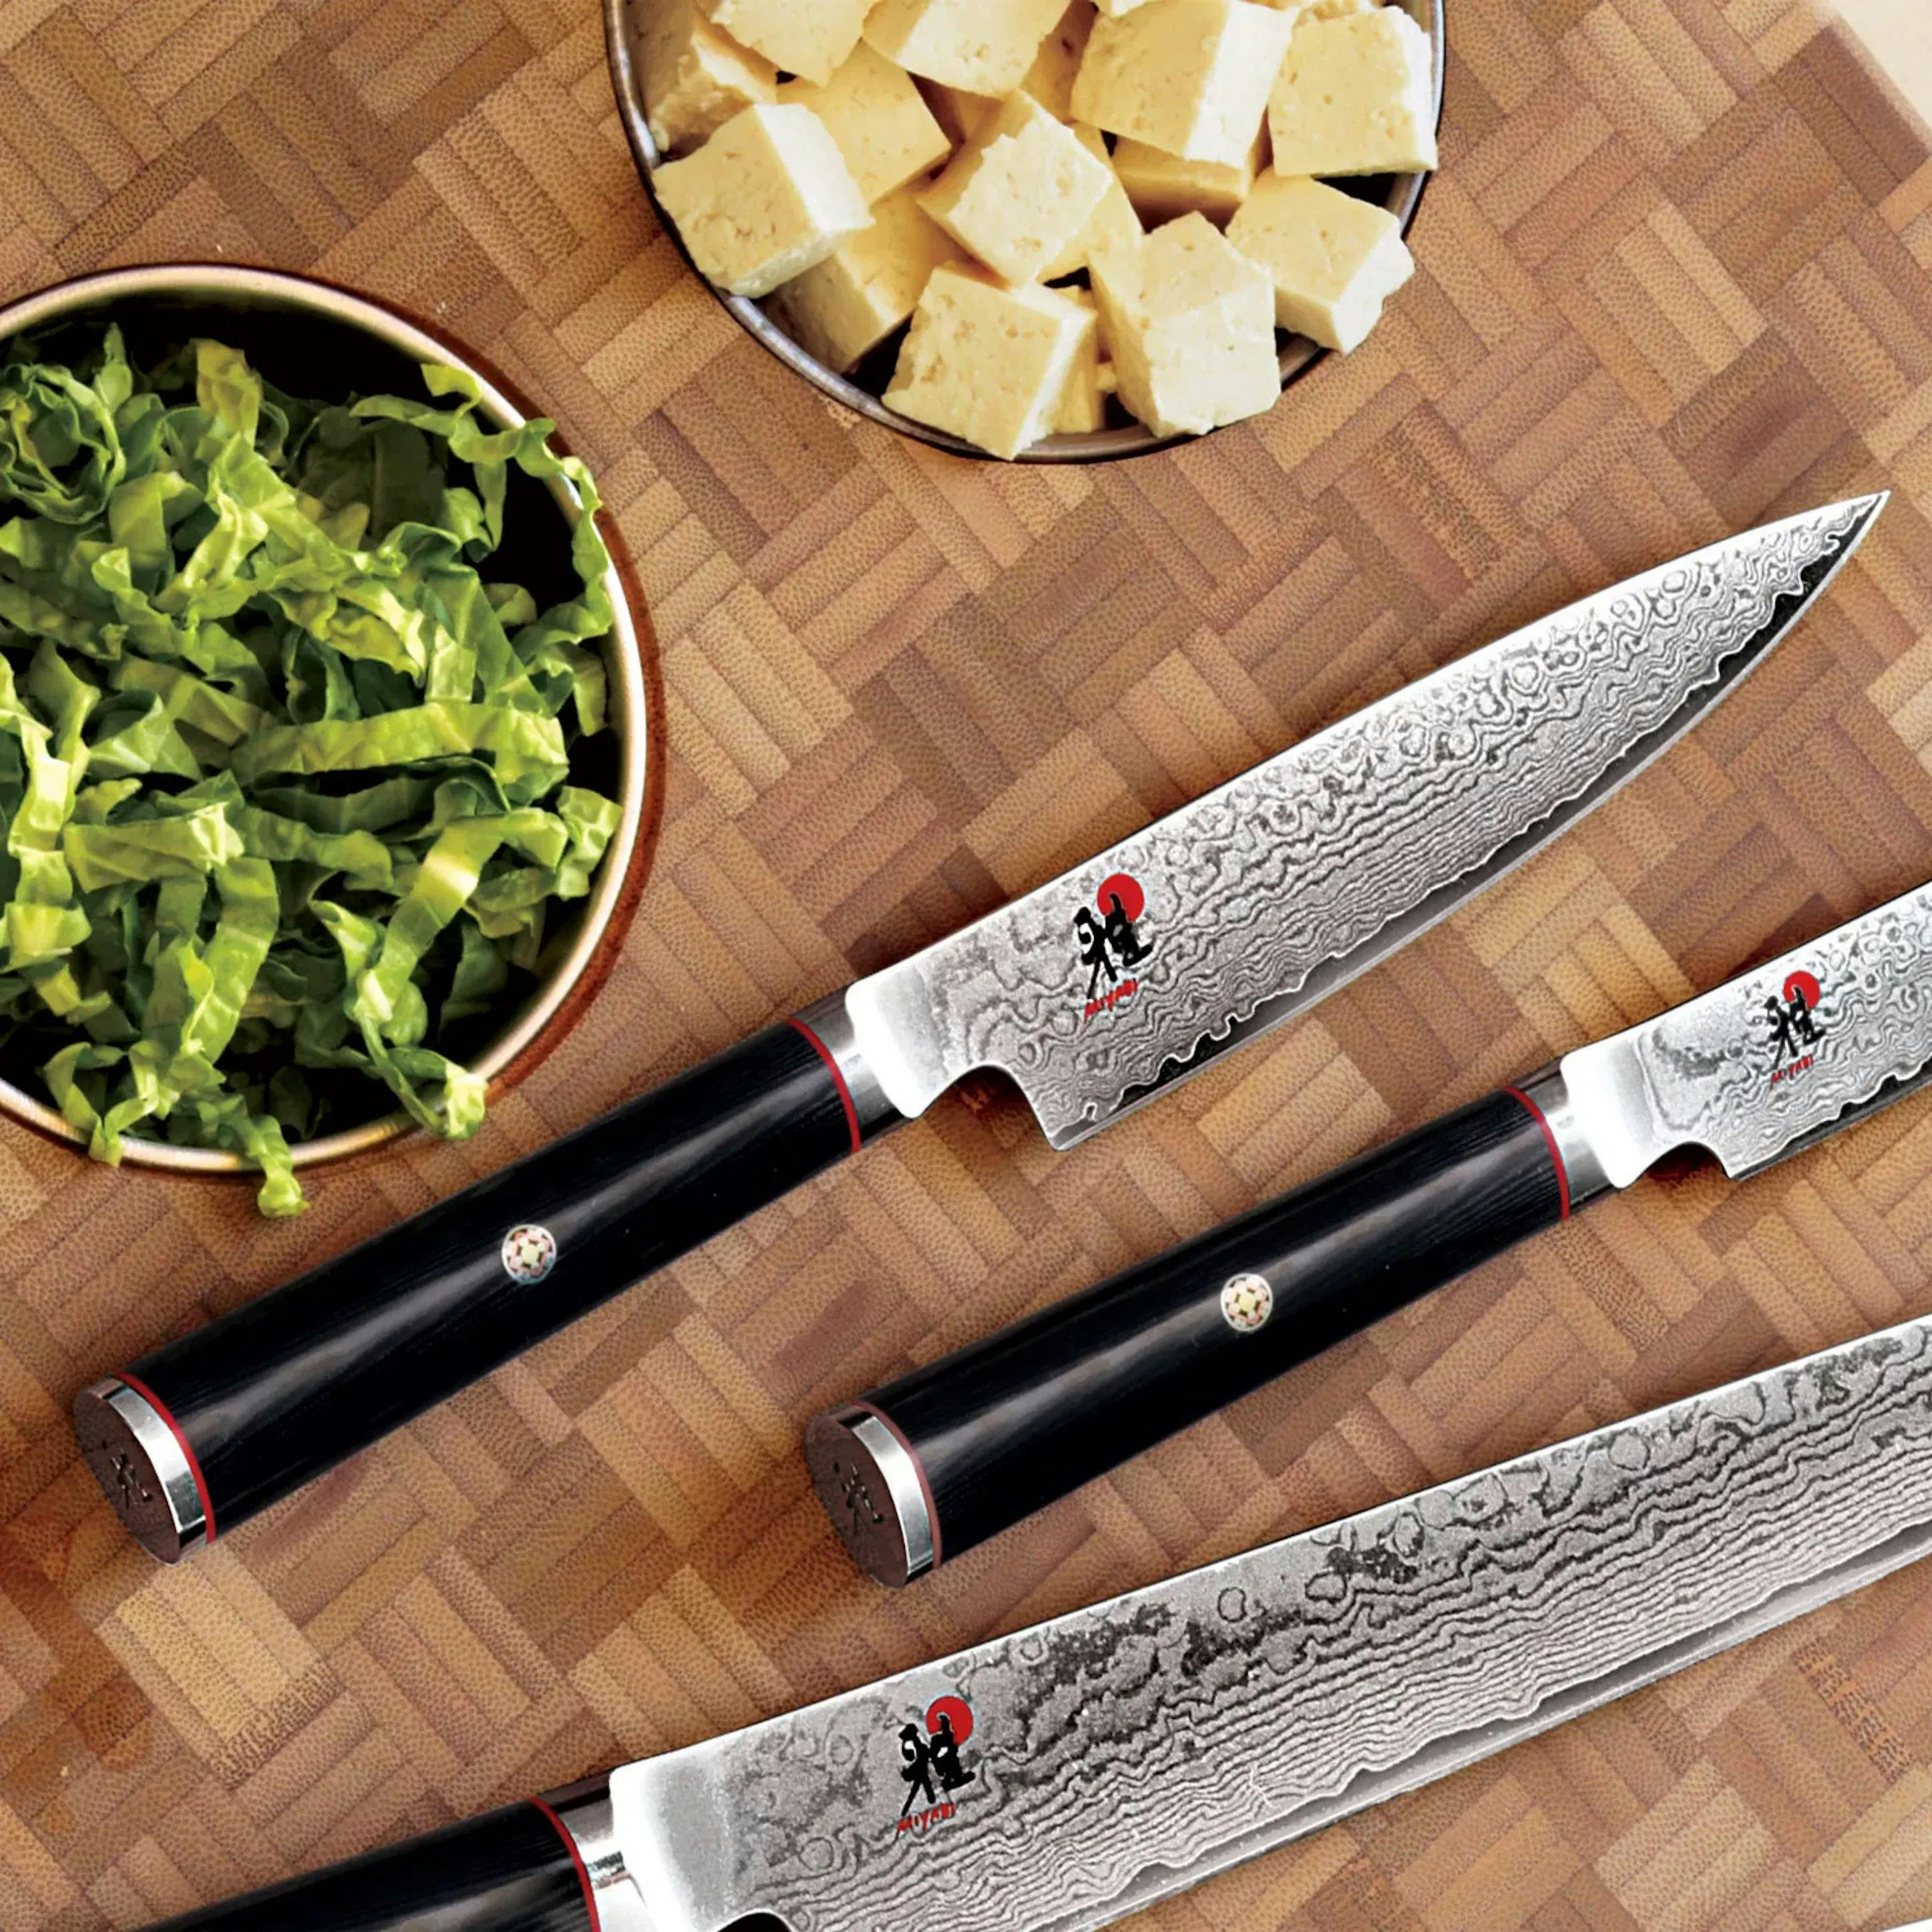 Miyabi Kaizen knives next to some sliced cheese and vegetables. 